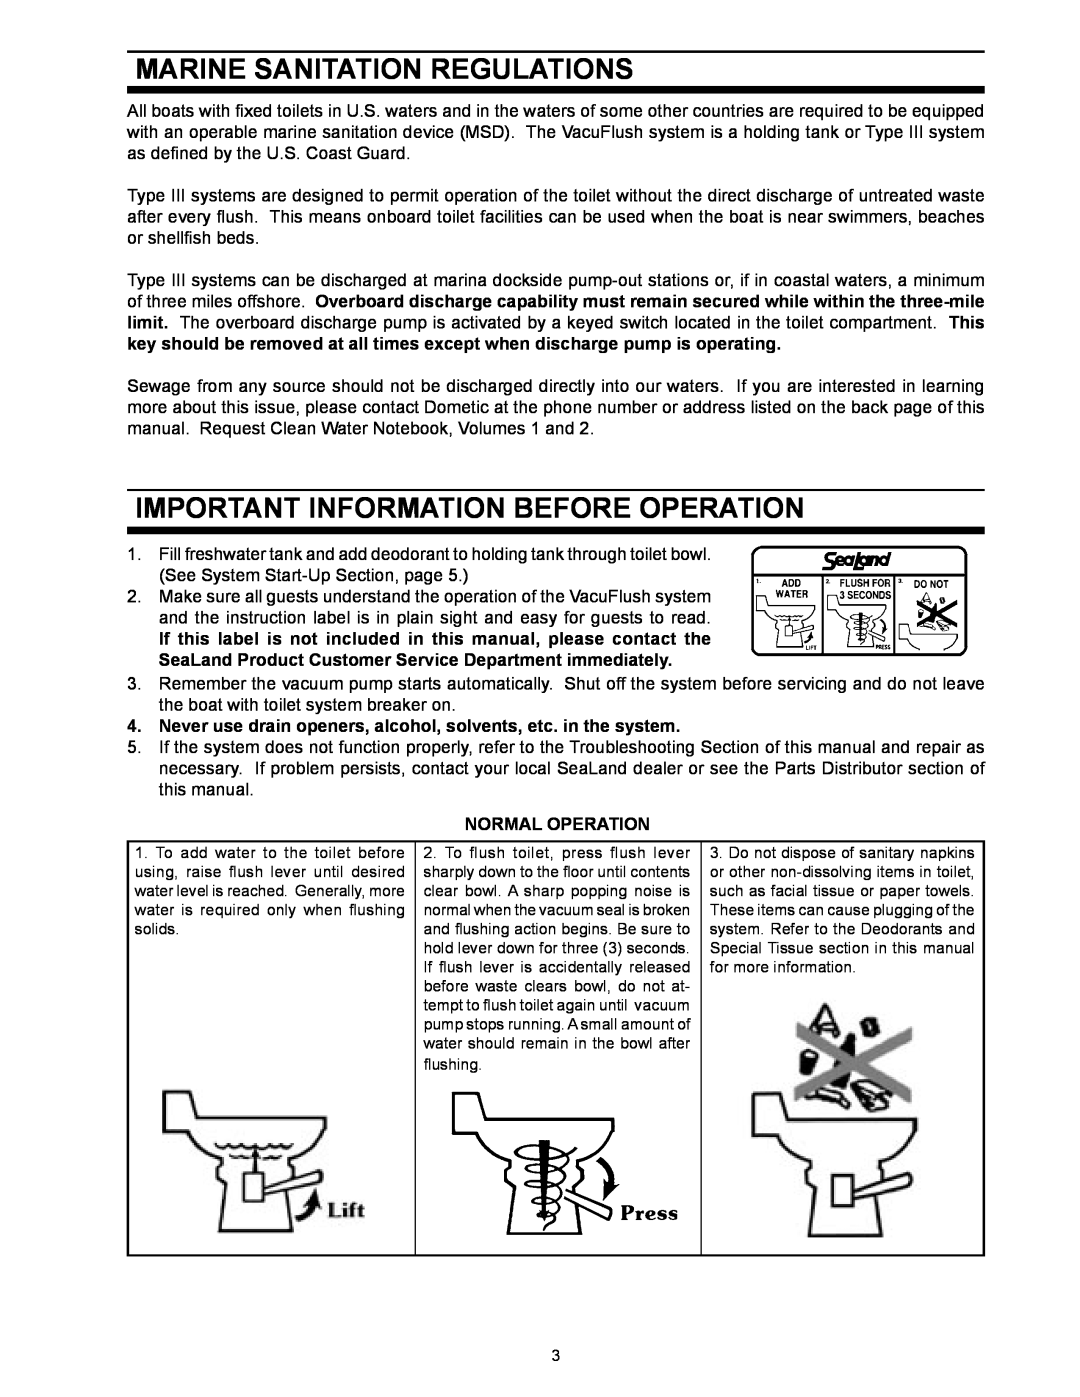 Dometic 706 owner manual Marine Sanitation Regulations, Important Information Before Operation, Normal Operation 